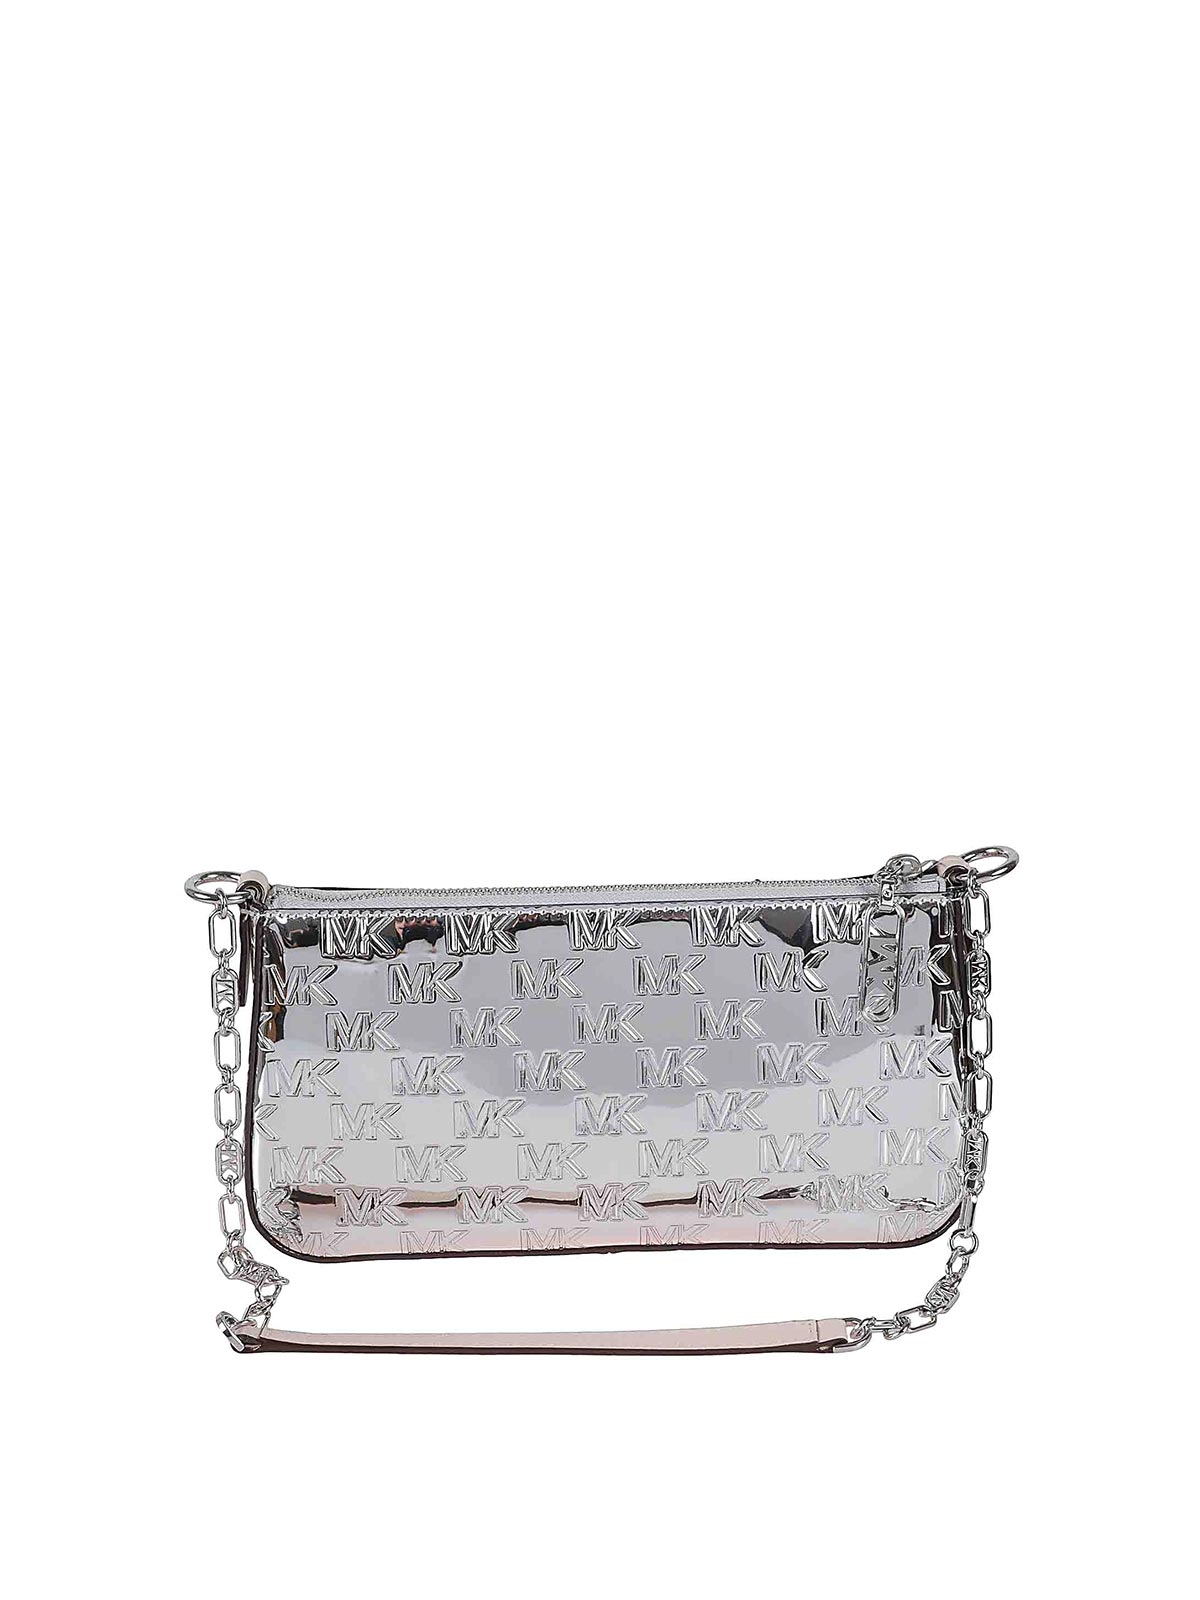 MICHAEL KORS: Michael bag in grained laminated leather - Silver | MICHAEL  KORS crossbody bags 32H0SJ6M2L online at GIGLIO.COM